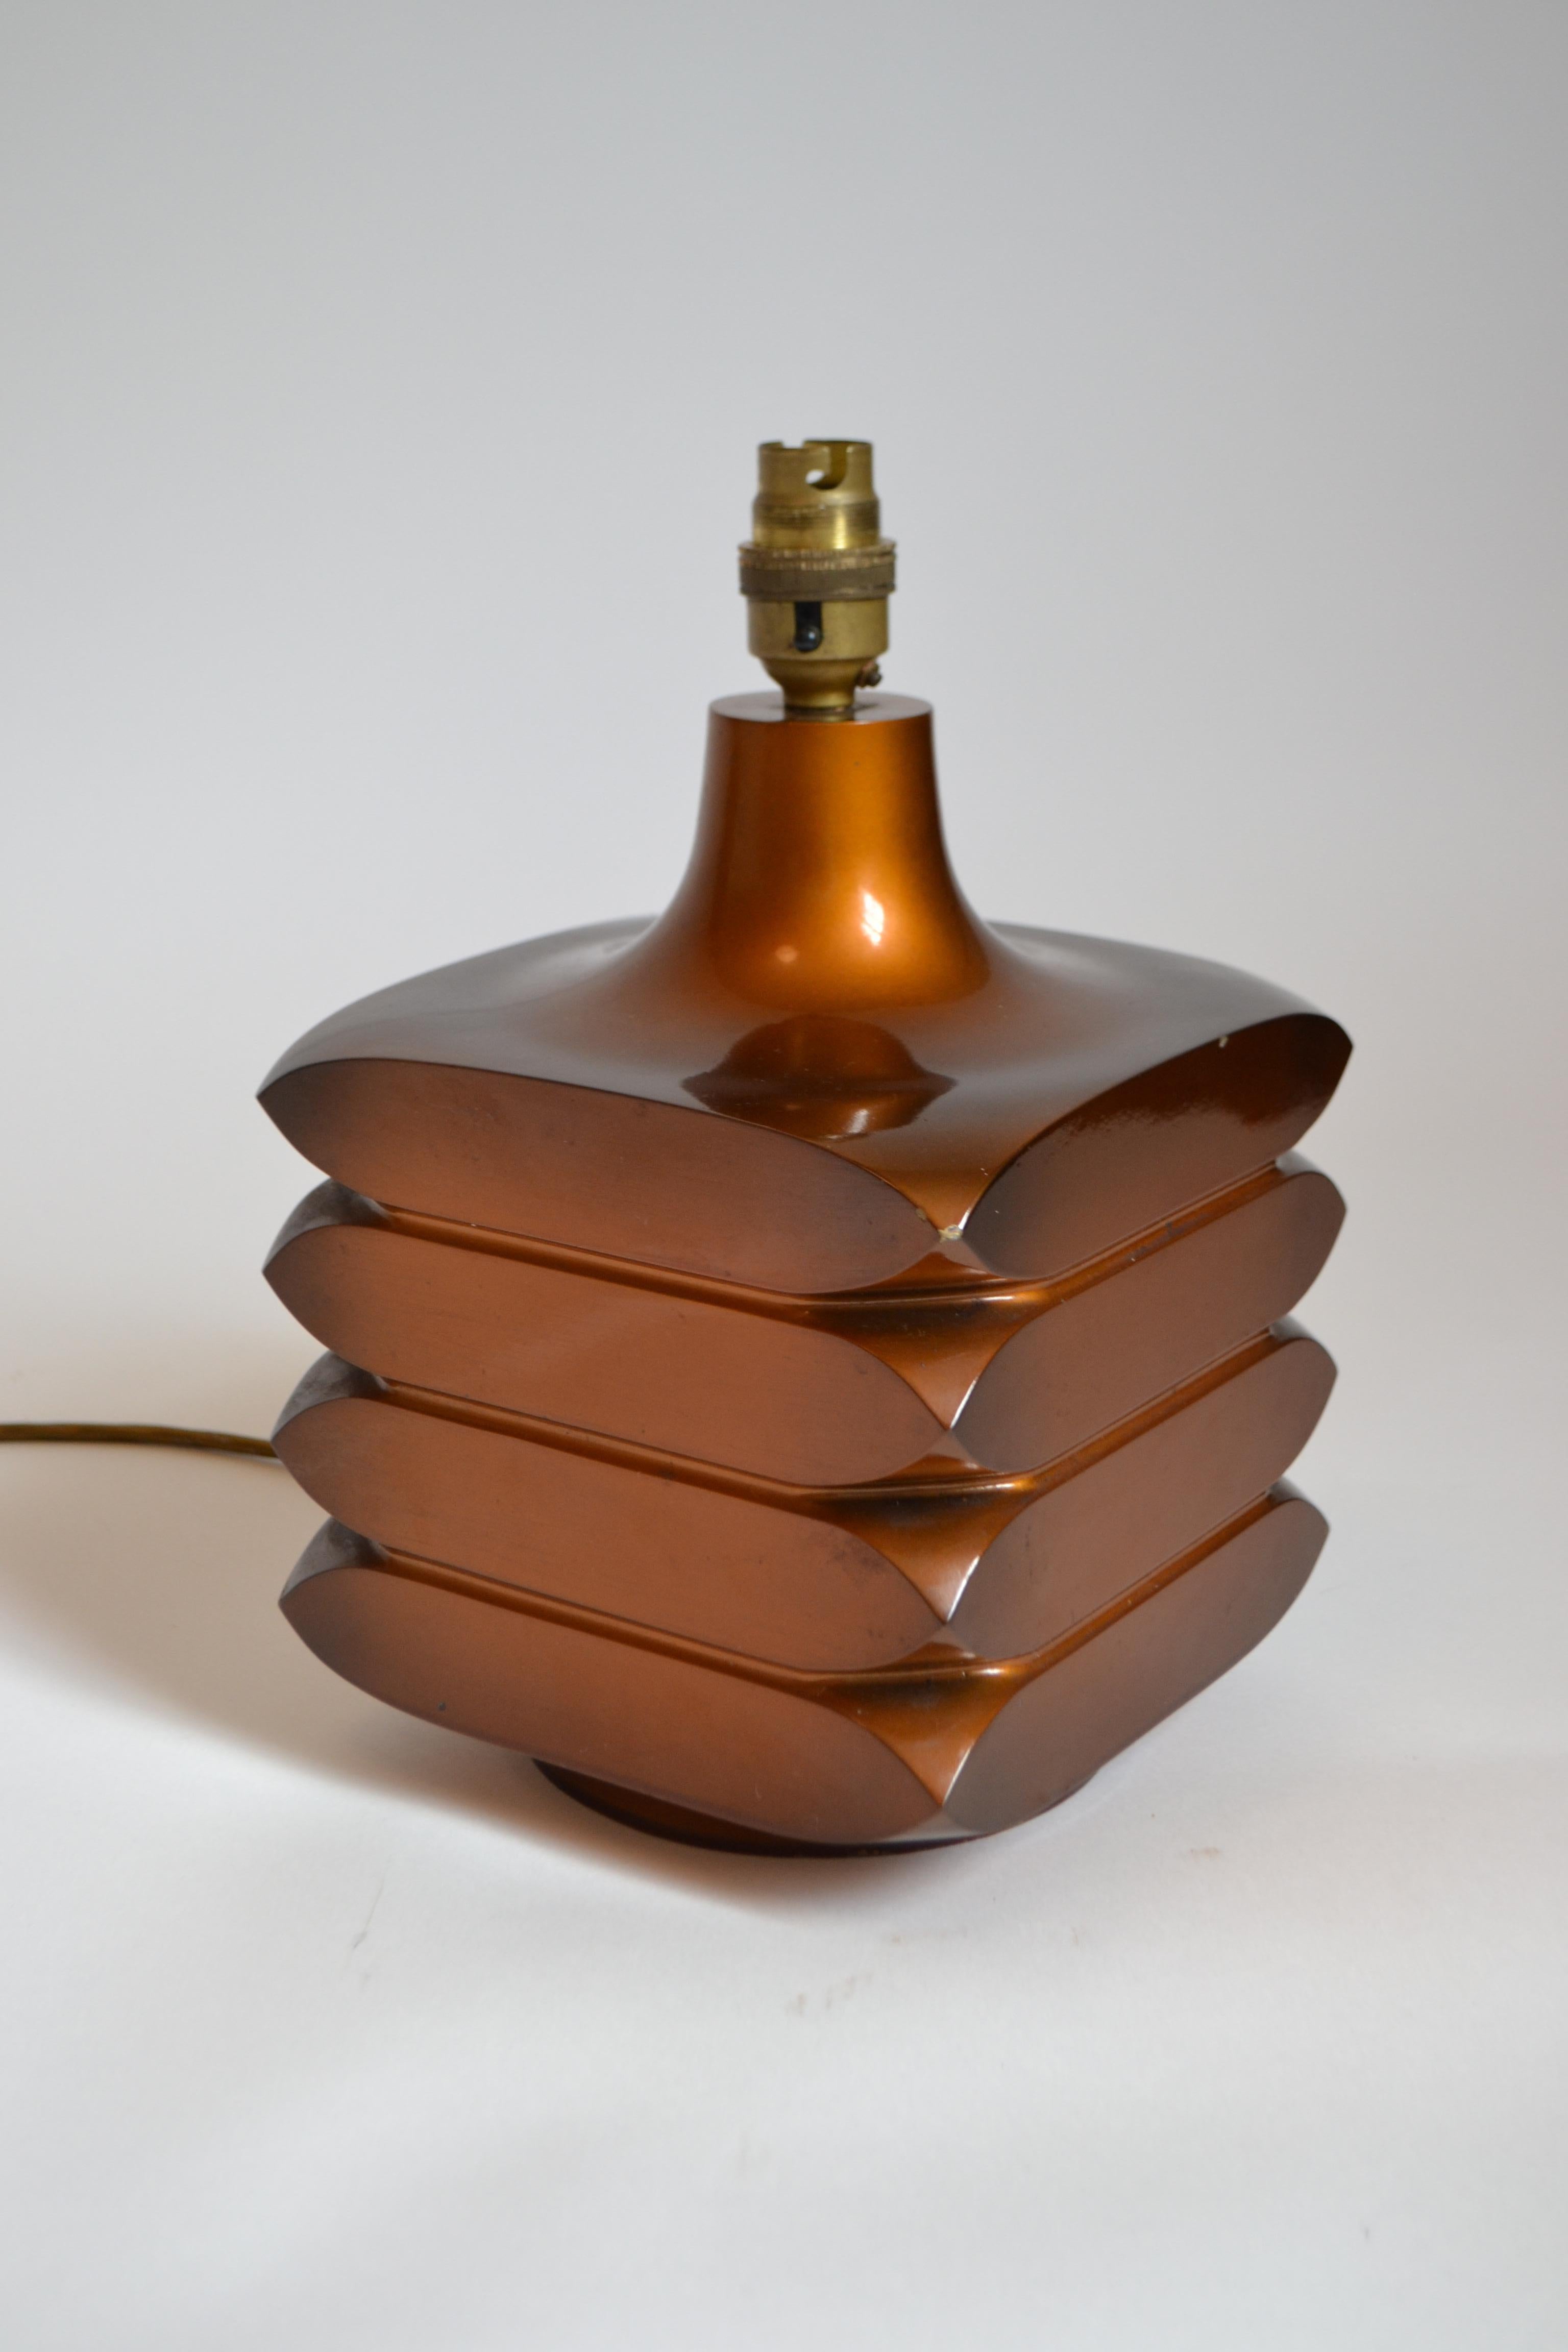 1970s Facette copper ceramic table lamp designed by Carl Zalloni and manufactured by Steuler Germany. Small chips to corner as pictured.